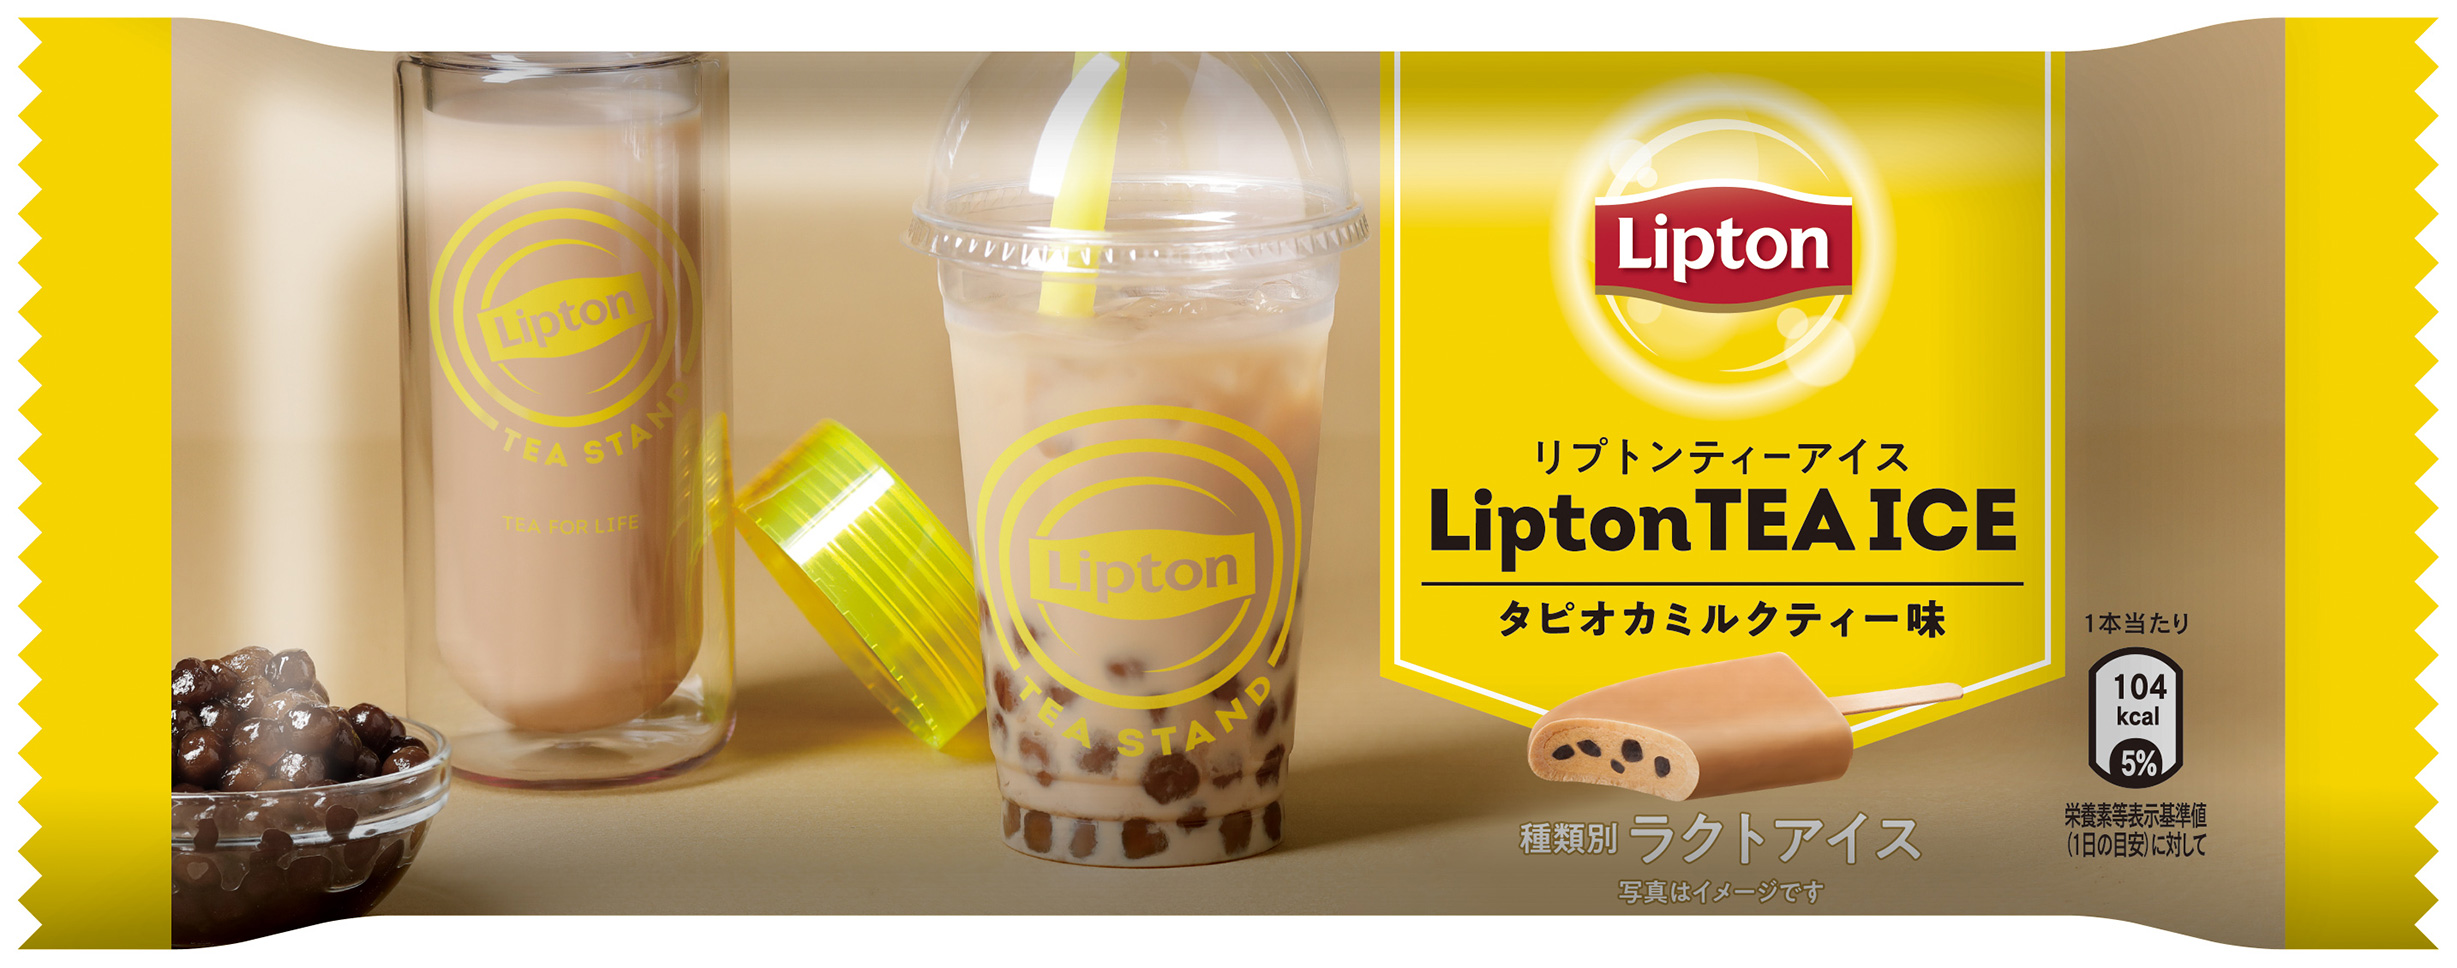 Japanese packaging fonts for Lipton brand